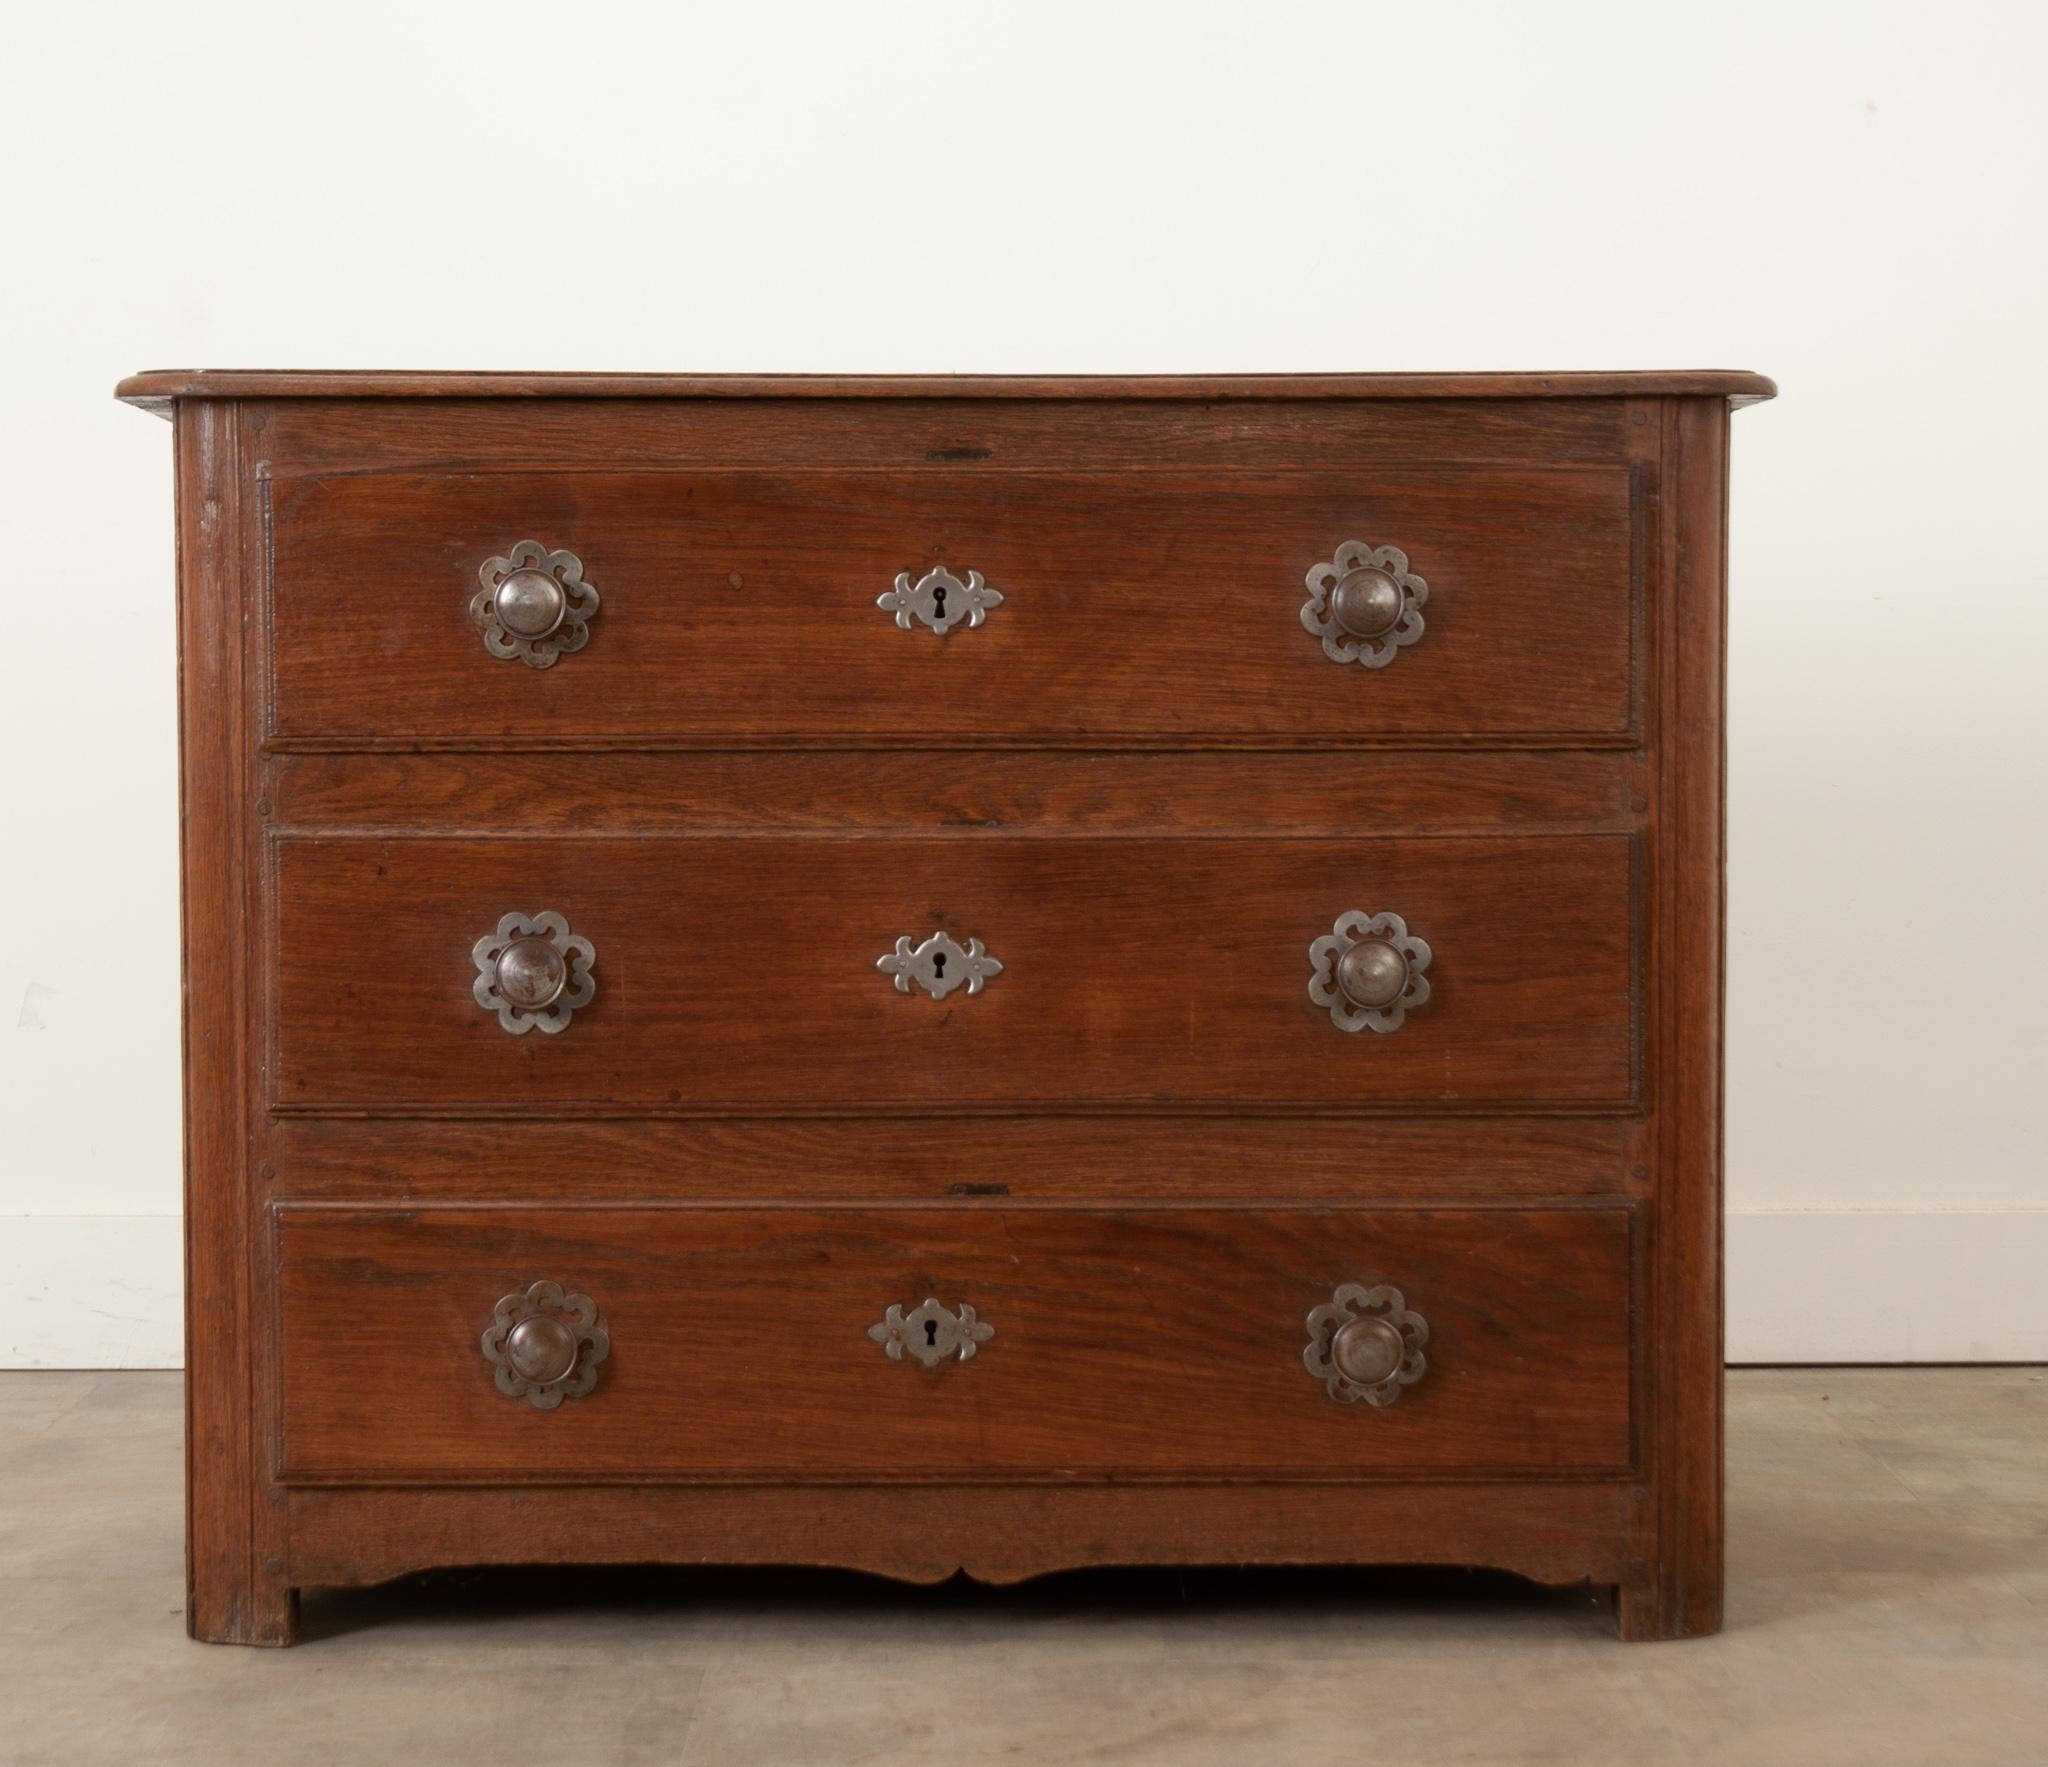 A handsome French commode made in the 1780’s of solid oak. The drawers have intricately hand cut steel escutcheon plates and knobs. The drawers have been cleaned and slide open with ease. This commode has been tightened and polished with a French